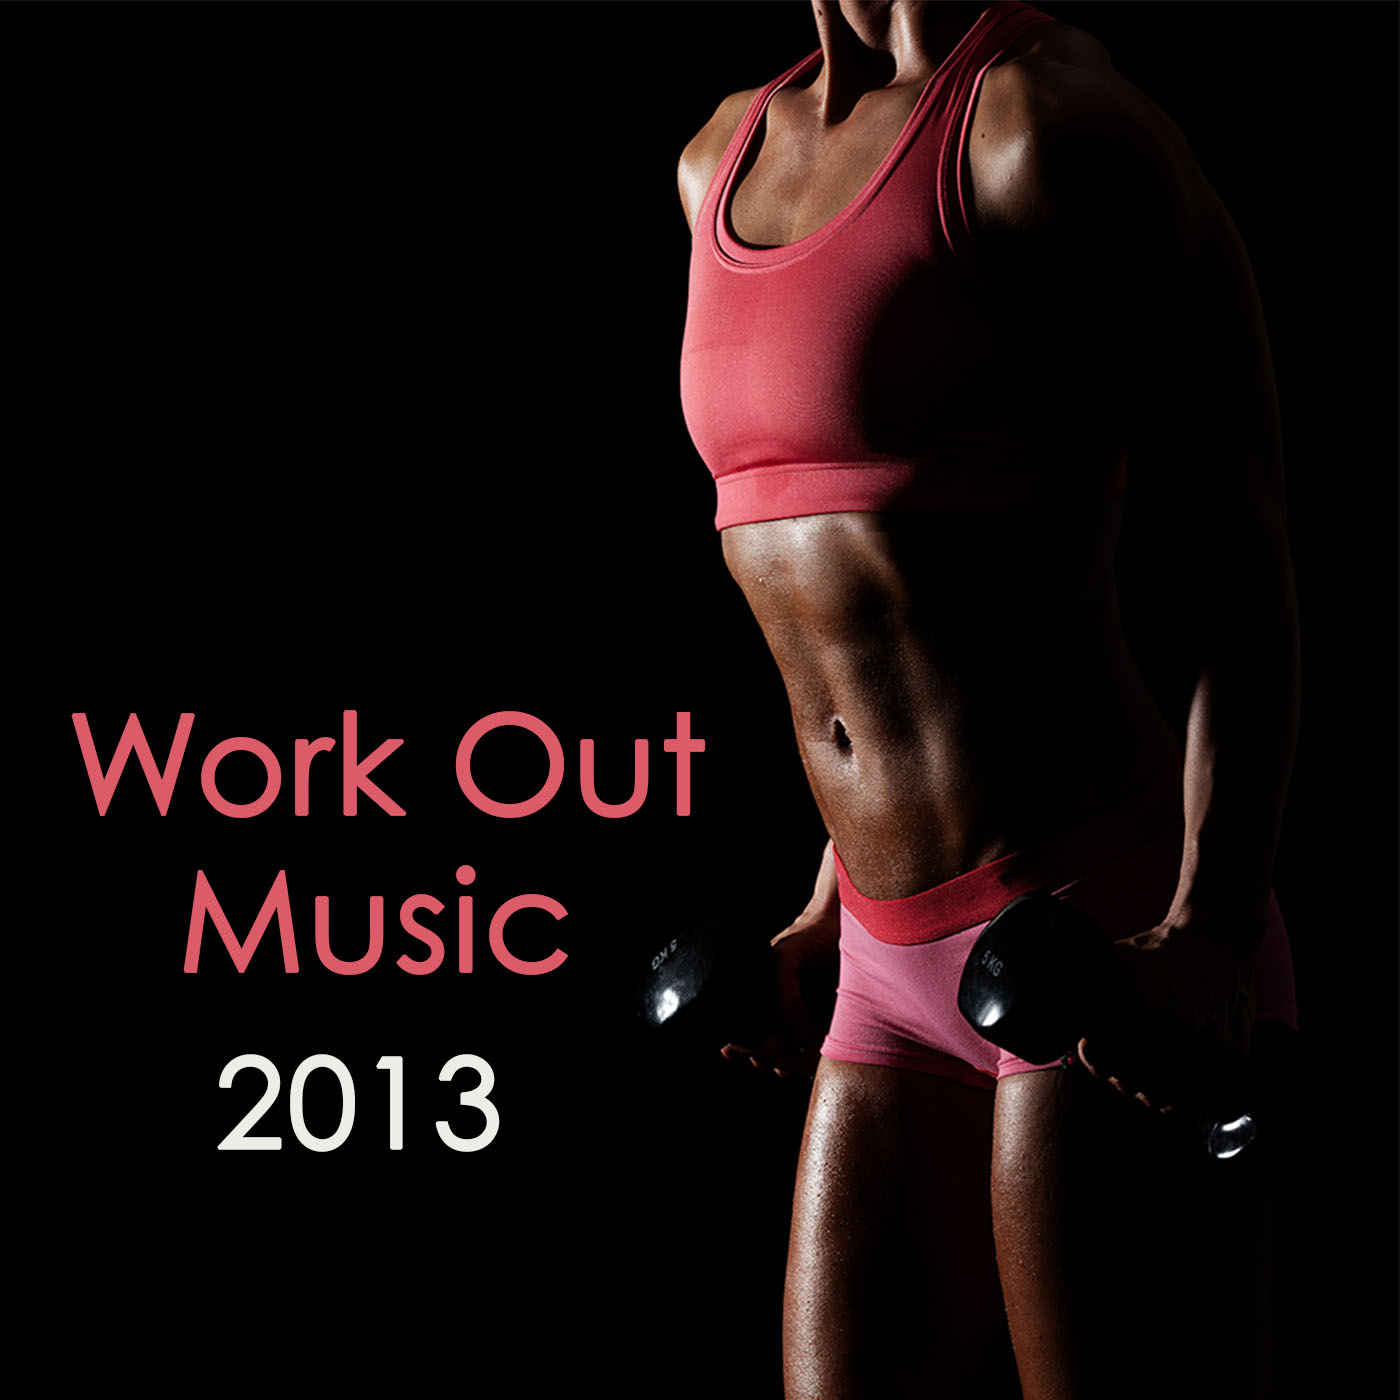 Work Out Music 2013